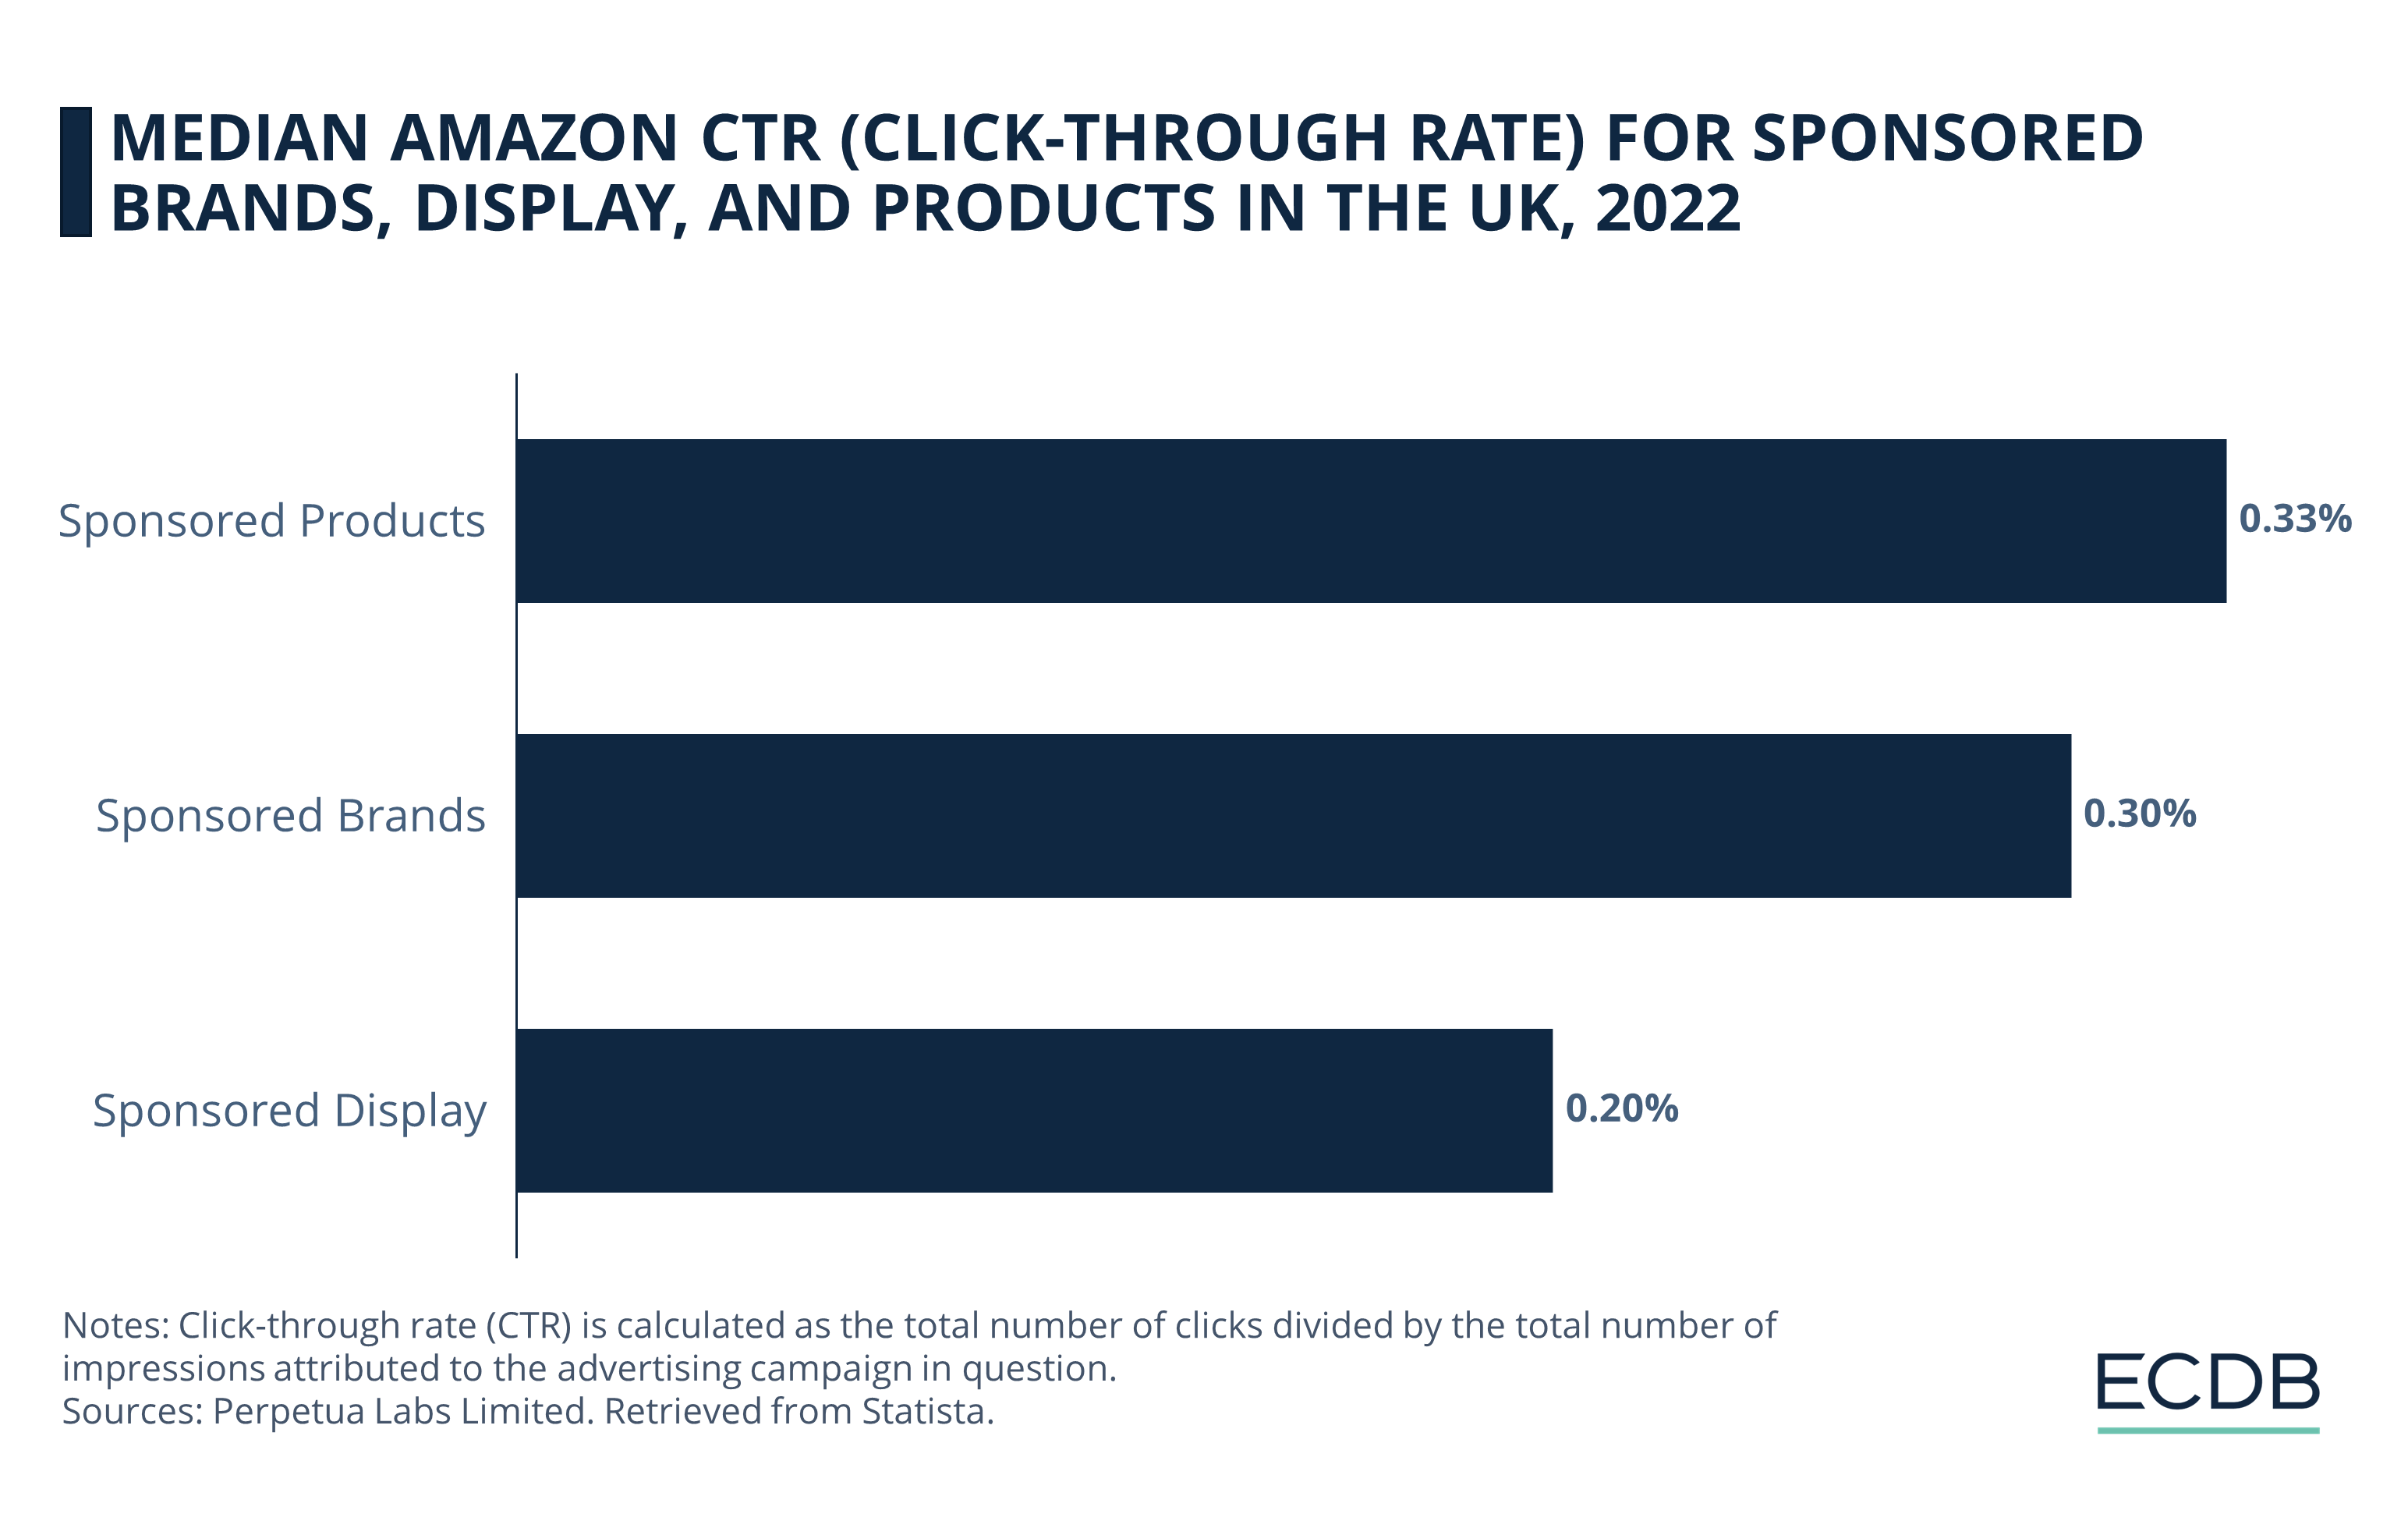 Median Amazon CTR for Sponsored Brands, Display, and Products in the UK, 2022